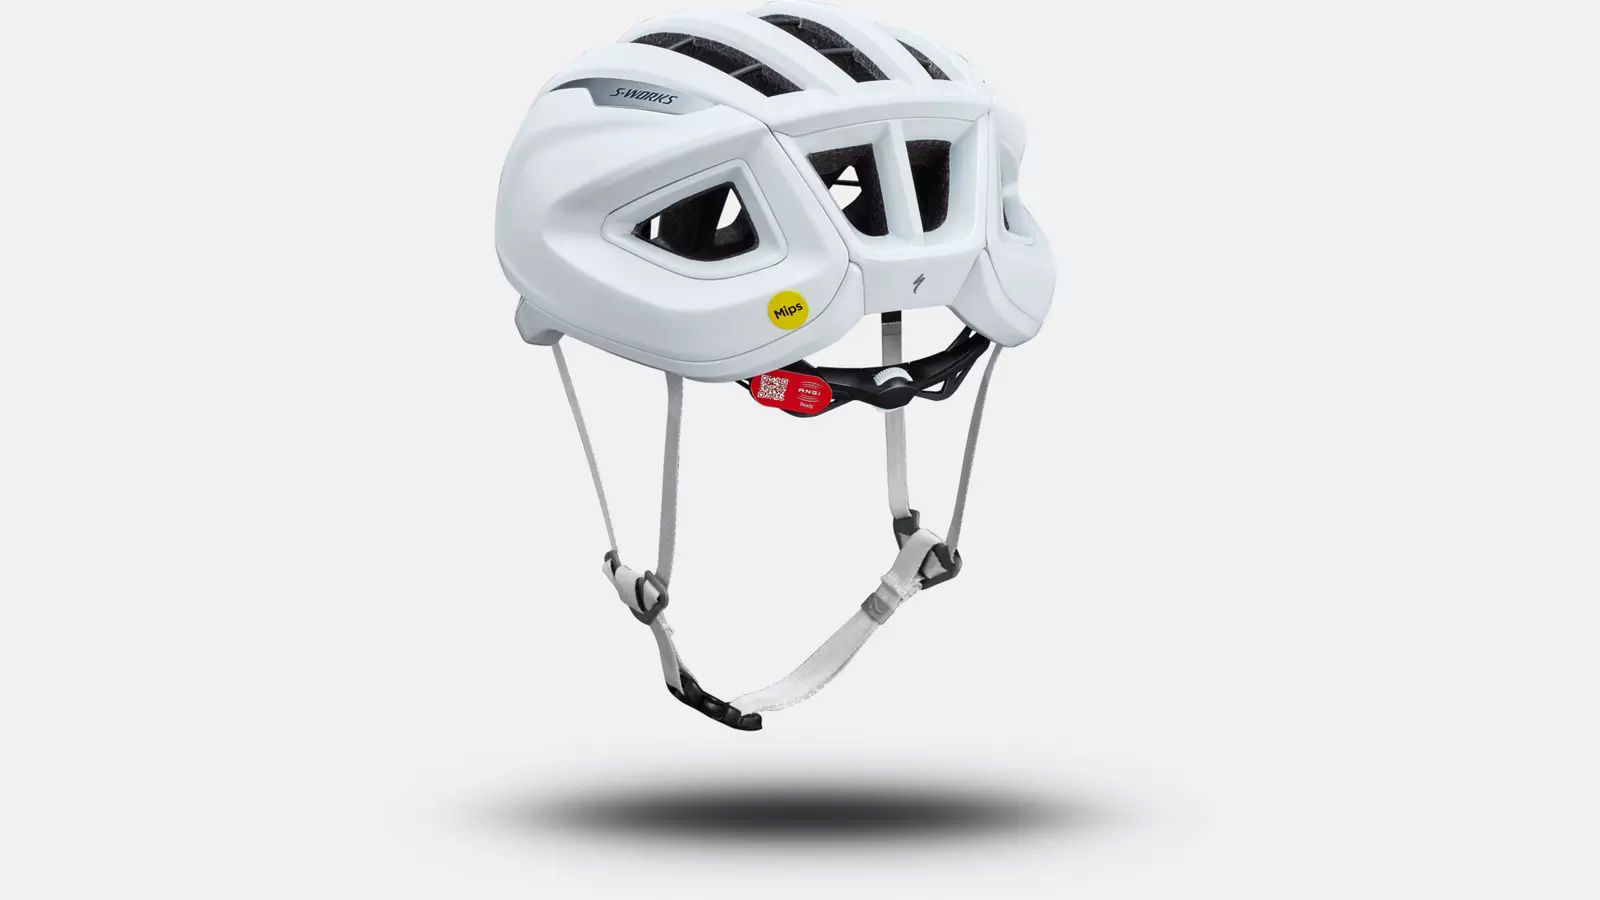 Immagine di Specialized Casco S-works Prevail 3 Mips Angi Bianco